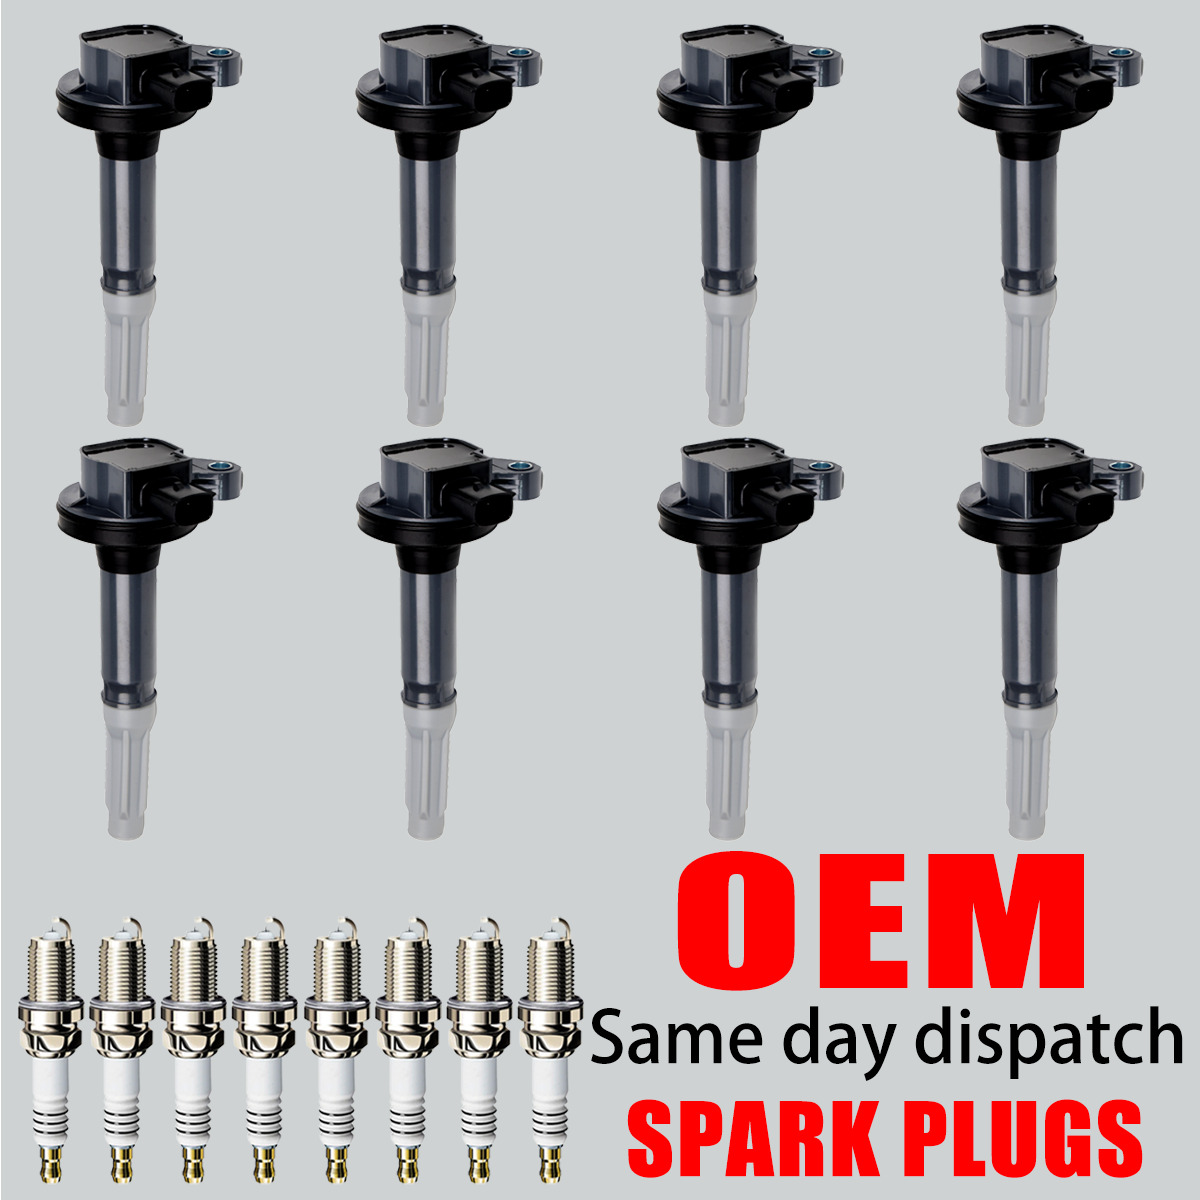 8X OEM Ignition Coil & 8X Iridium Spark Plug For Ford F150 Mustang 5.0L V8 UF622